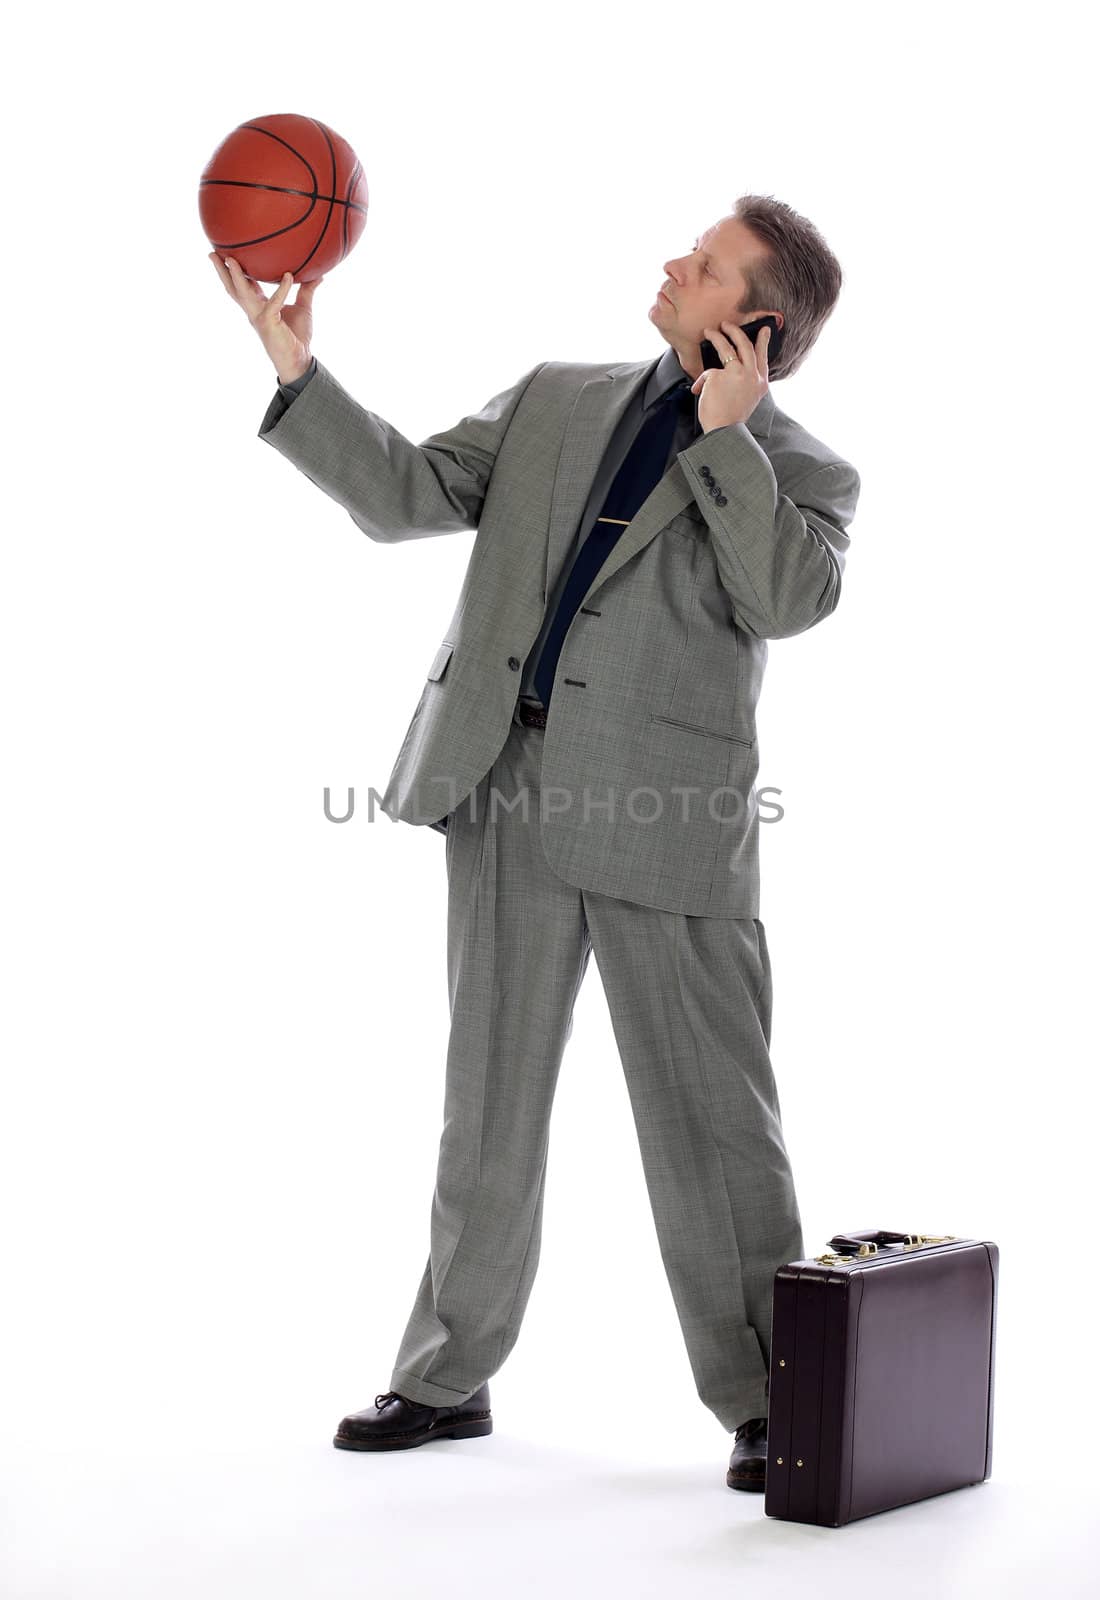 Business Man Holding a Basket Ball and Cell Phone by libyphoto